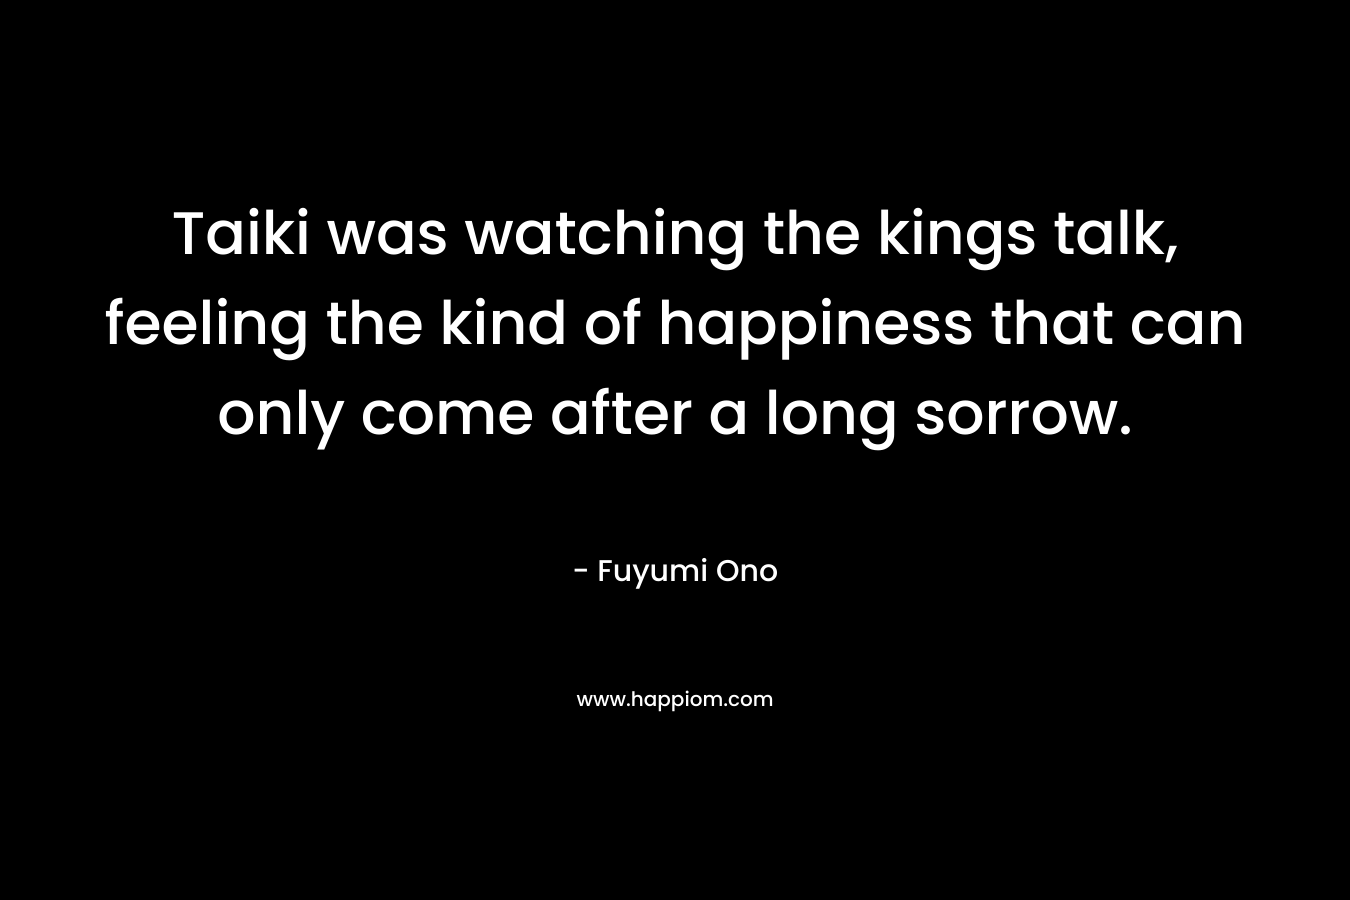 Taiki was watching the kings talk, feeling the kind of happiness that can only come after a long sorrow. – Fuyumi Ono